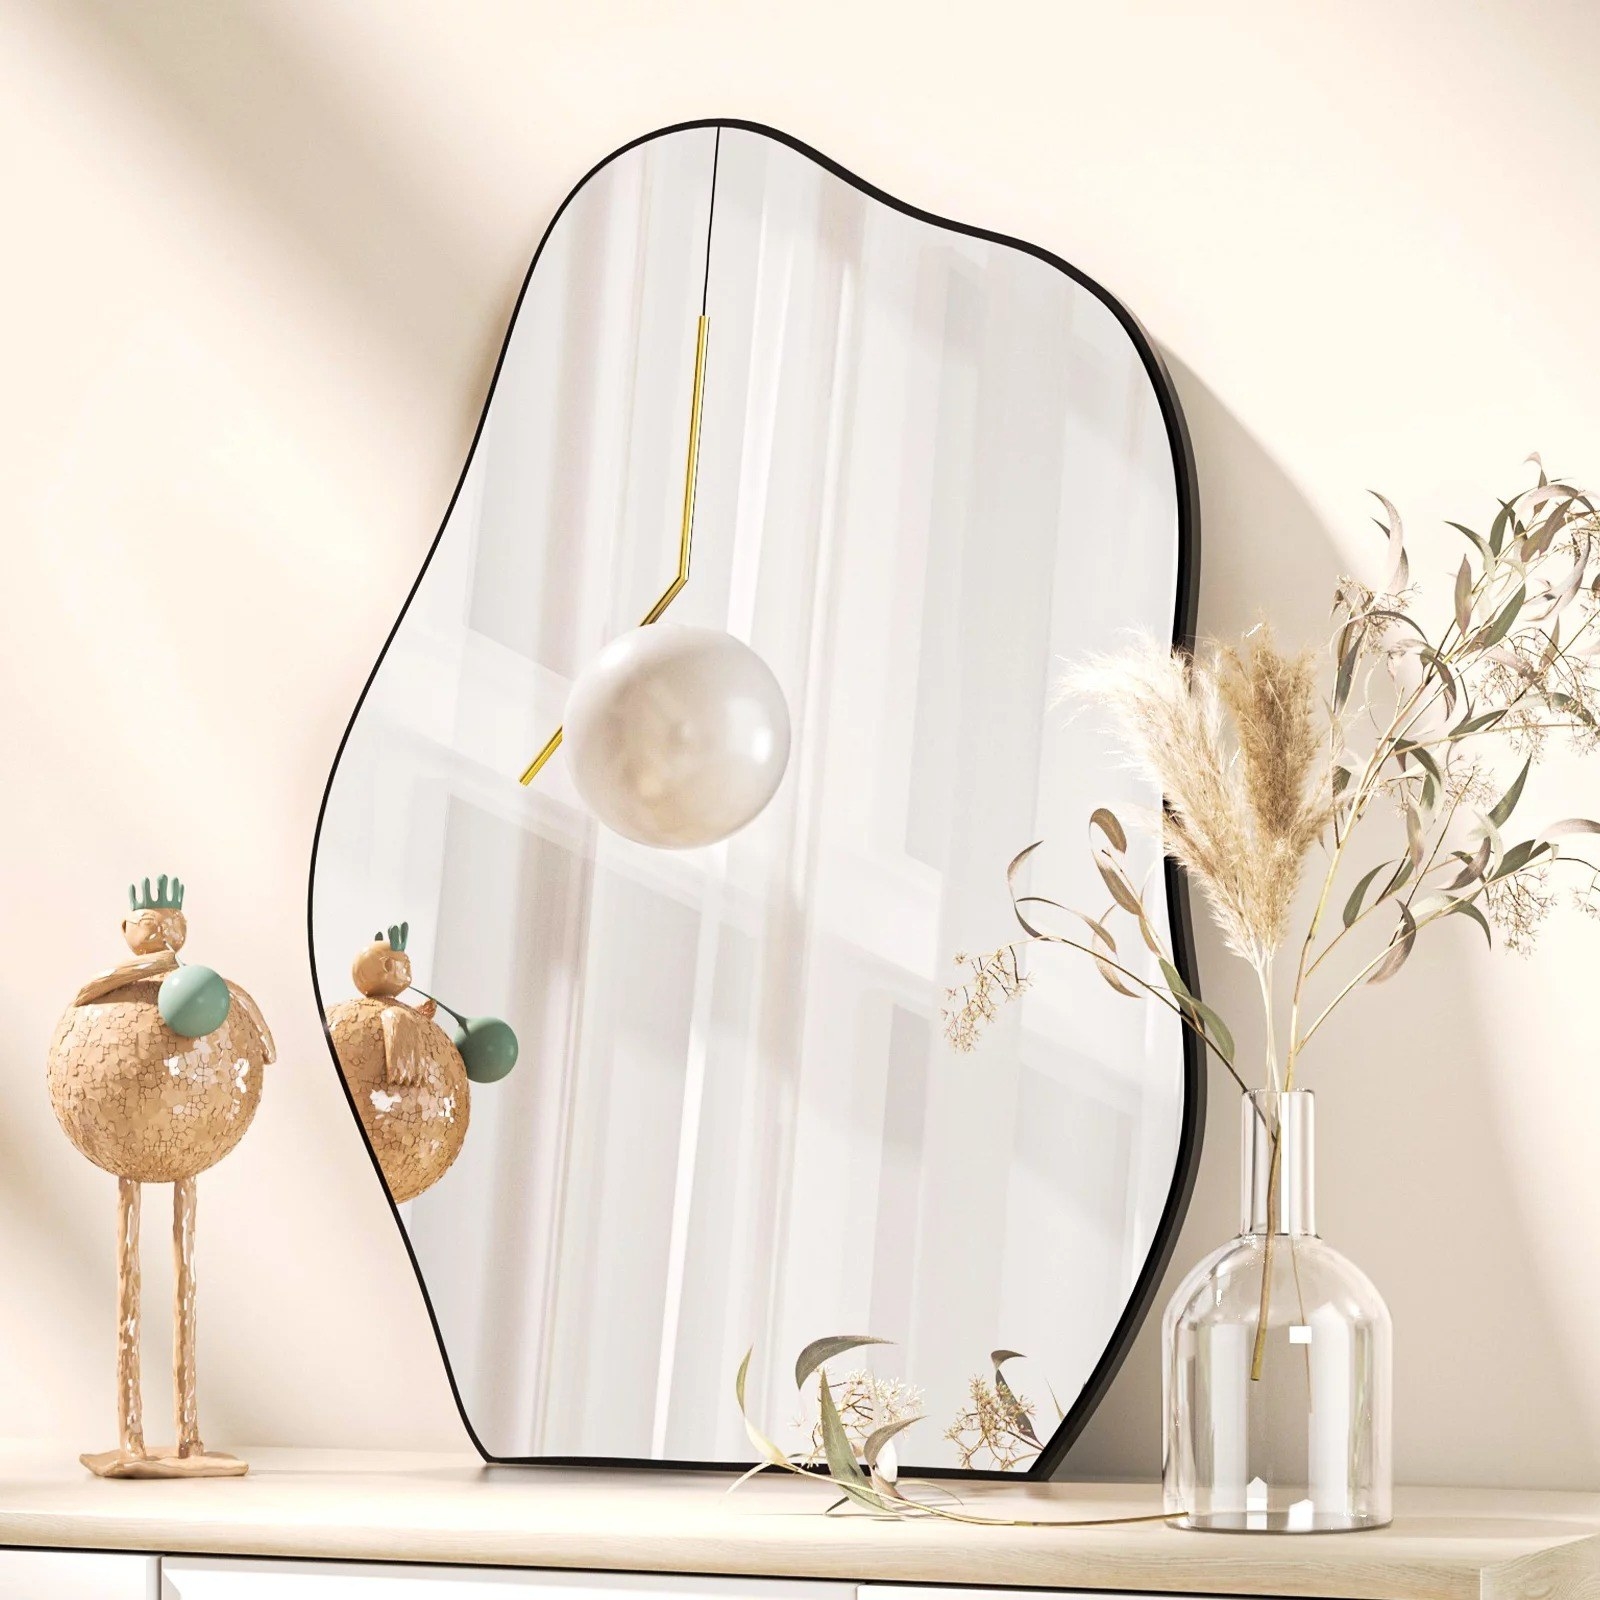 Wavy wall mirror on dresser top, next to decorative piece and clear vase with faux plants